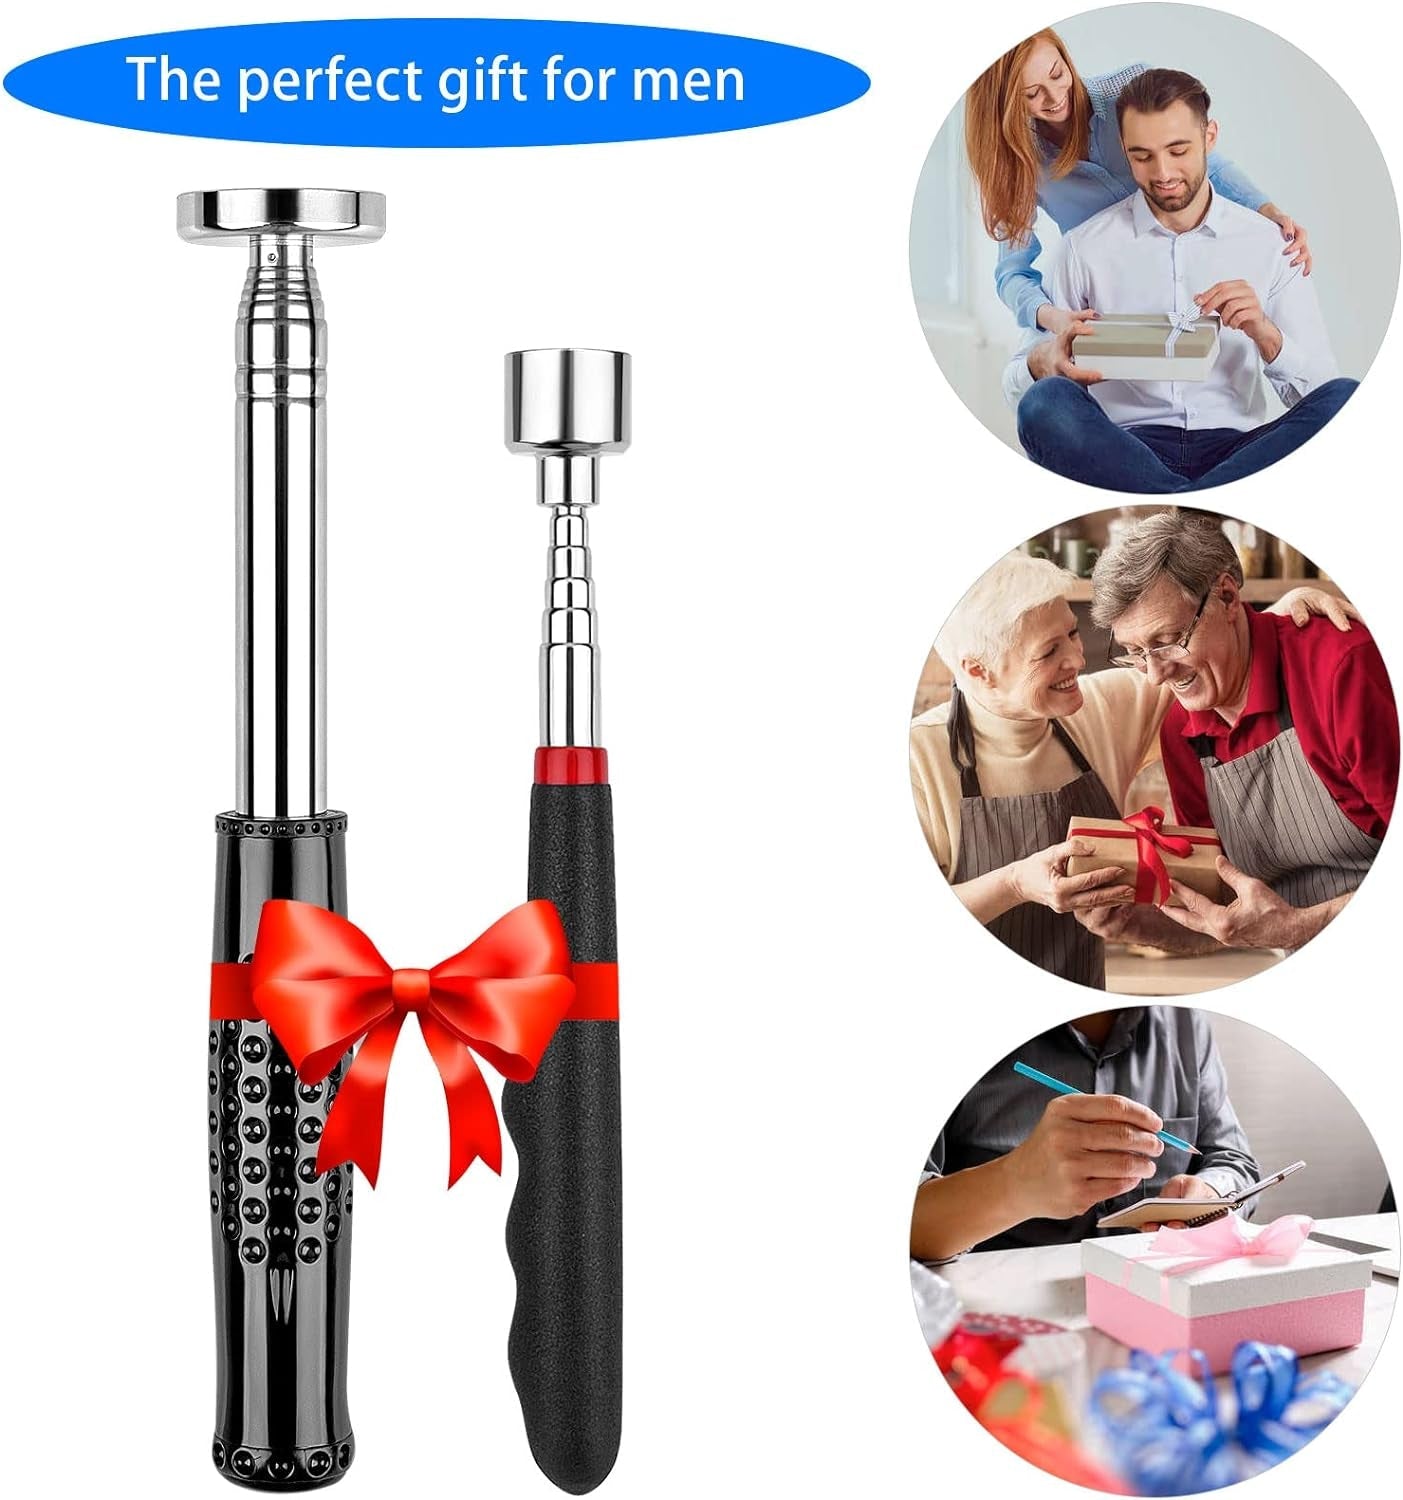 Magnetic Pickup Tool 2PCS Extendable Magnet Stick with 35LB and 20LB Telescoping Magnet Stick Tool, Gift for Men